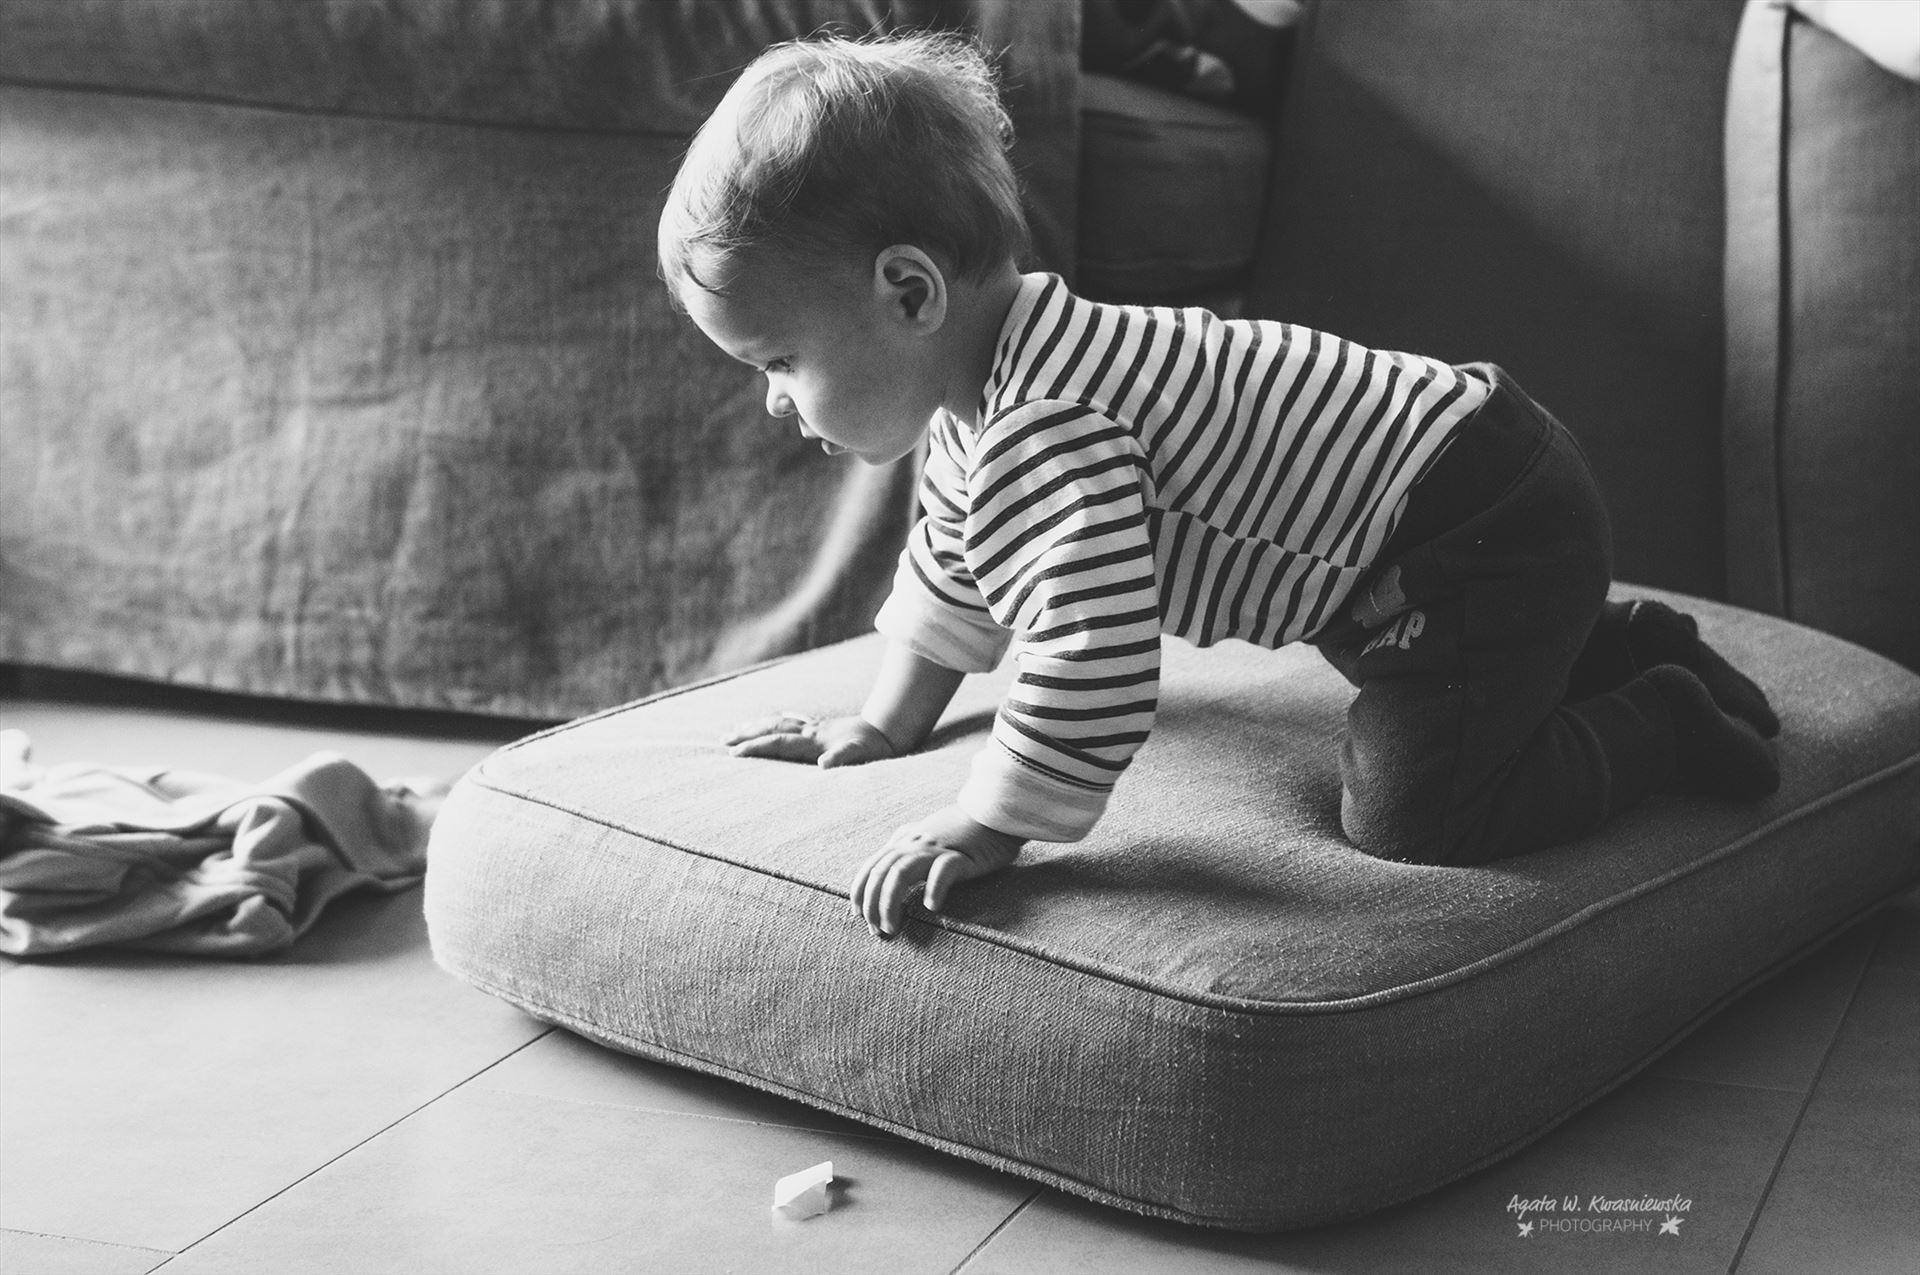 The youngest  by Agata W. Kwasniewska Photography